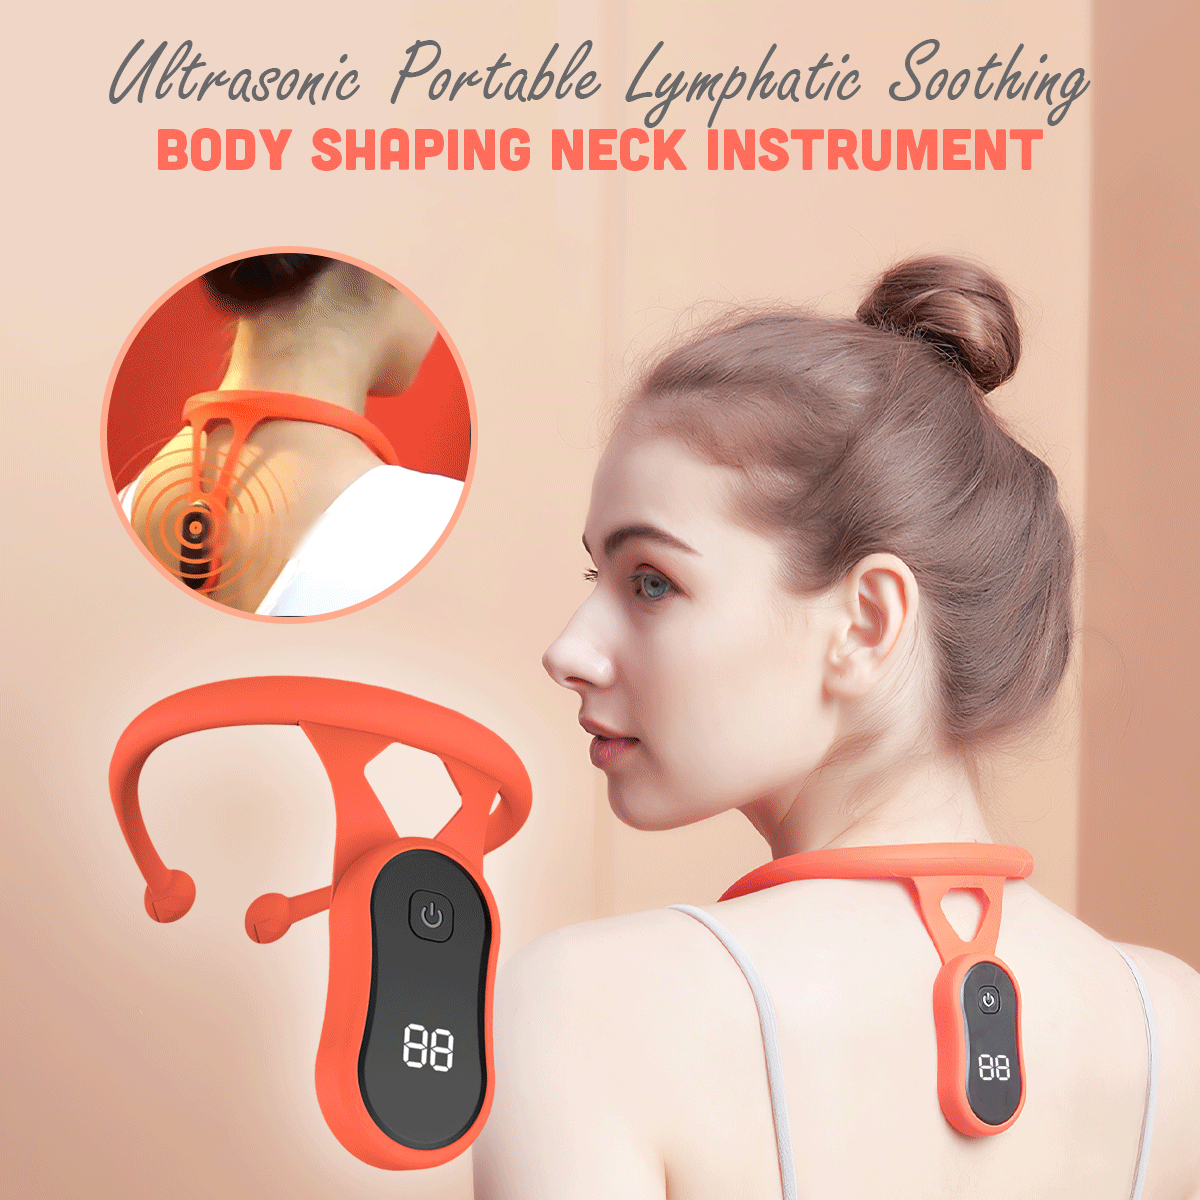 Ultrasonic Portable Lymphatic Soothing body shaping Neck Instrument -FAEVEZ™ Beauty & Health